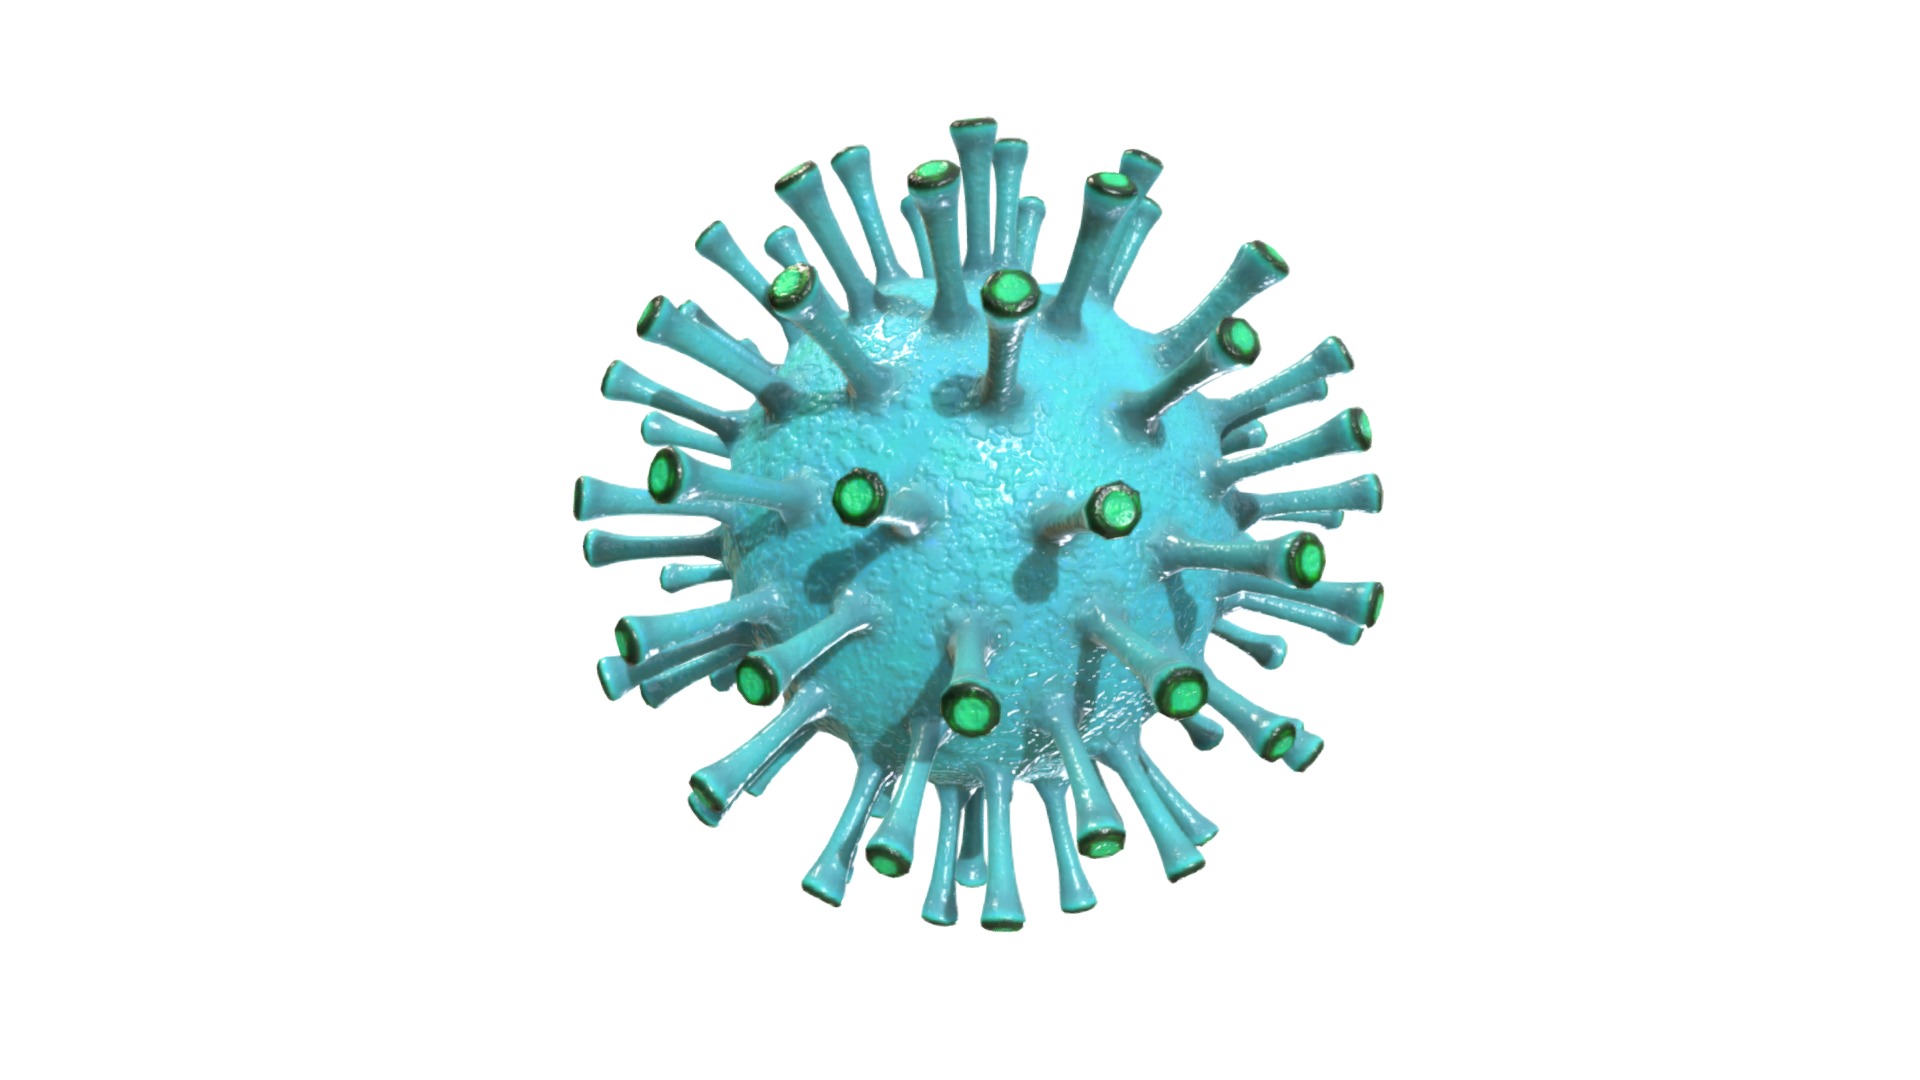 3D model Corona Virus Covid 19 - This is a 3D model of the Corona Virus Covid 19. The 3D model is about a blue and green toy.